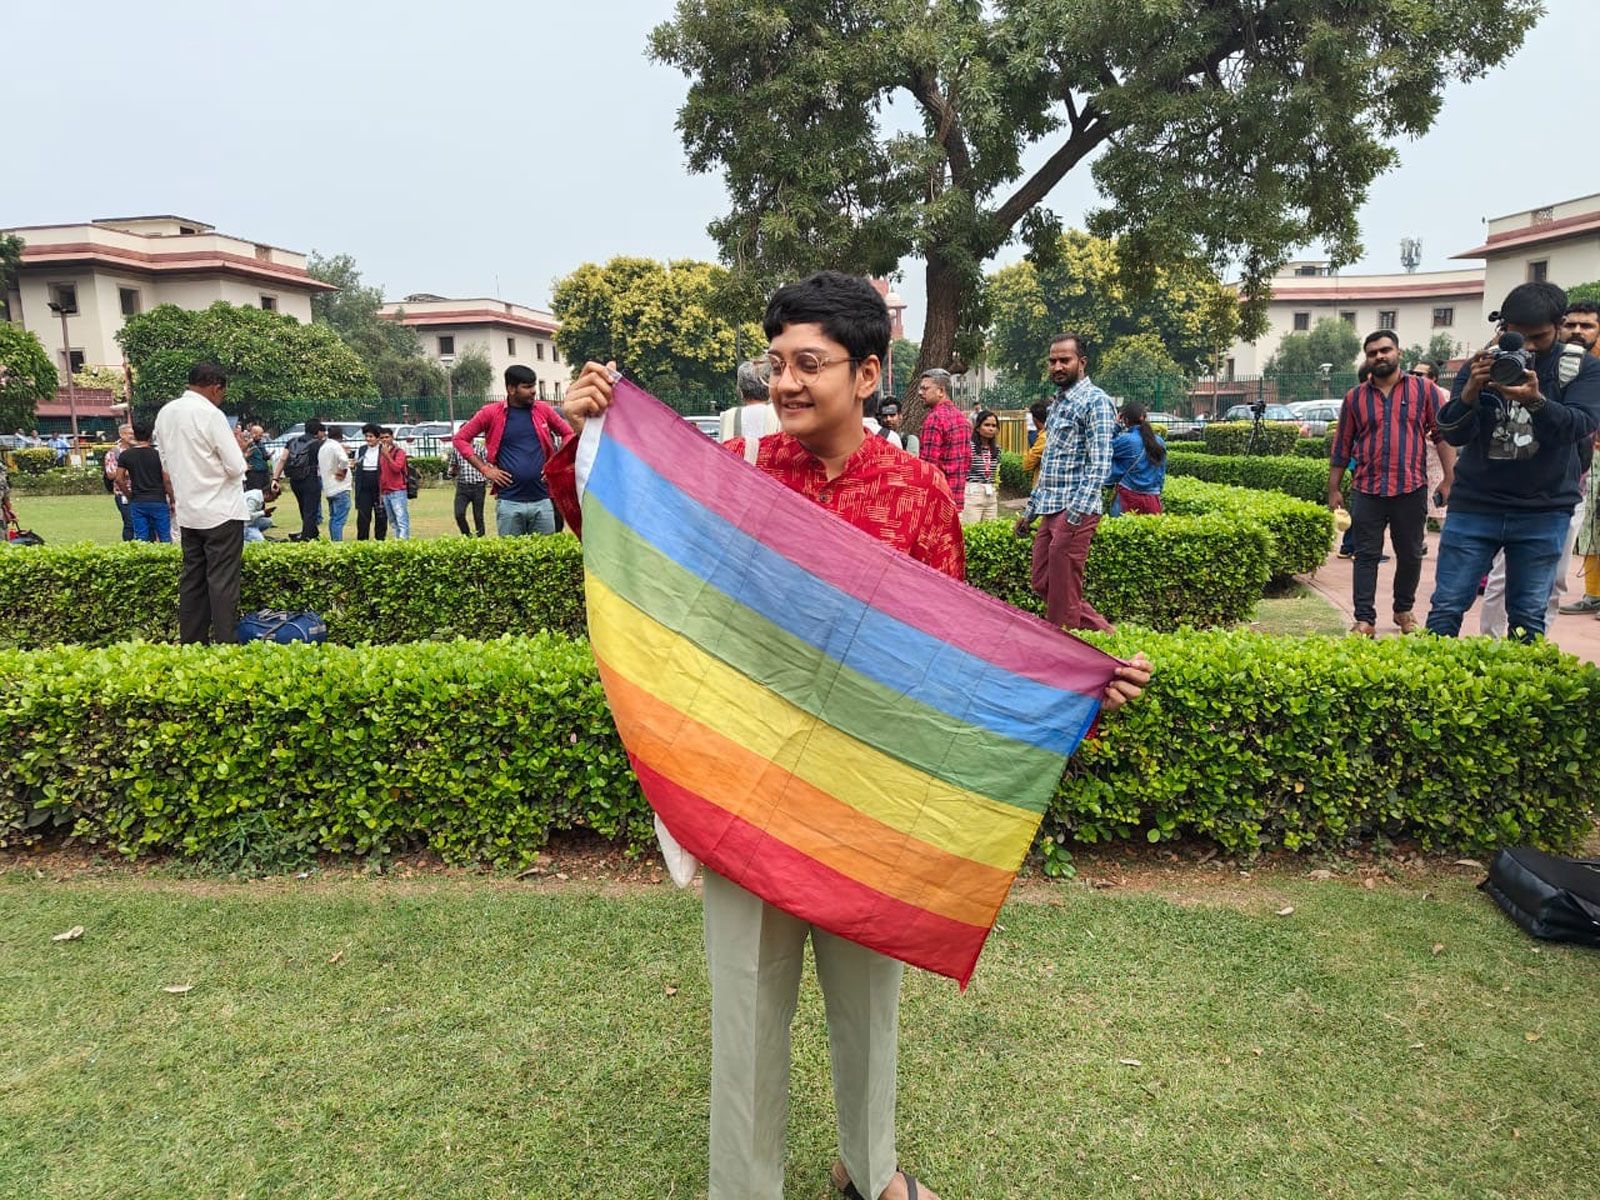 Vedika Xxx - India same-sex marriage verdict: Supreme Court declines to legalize right  to marry in landmark LGBTQ ruling | CNN